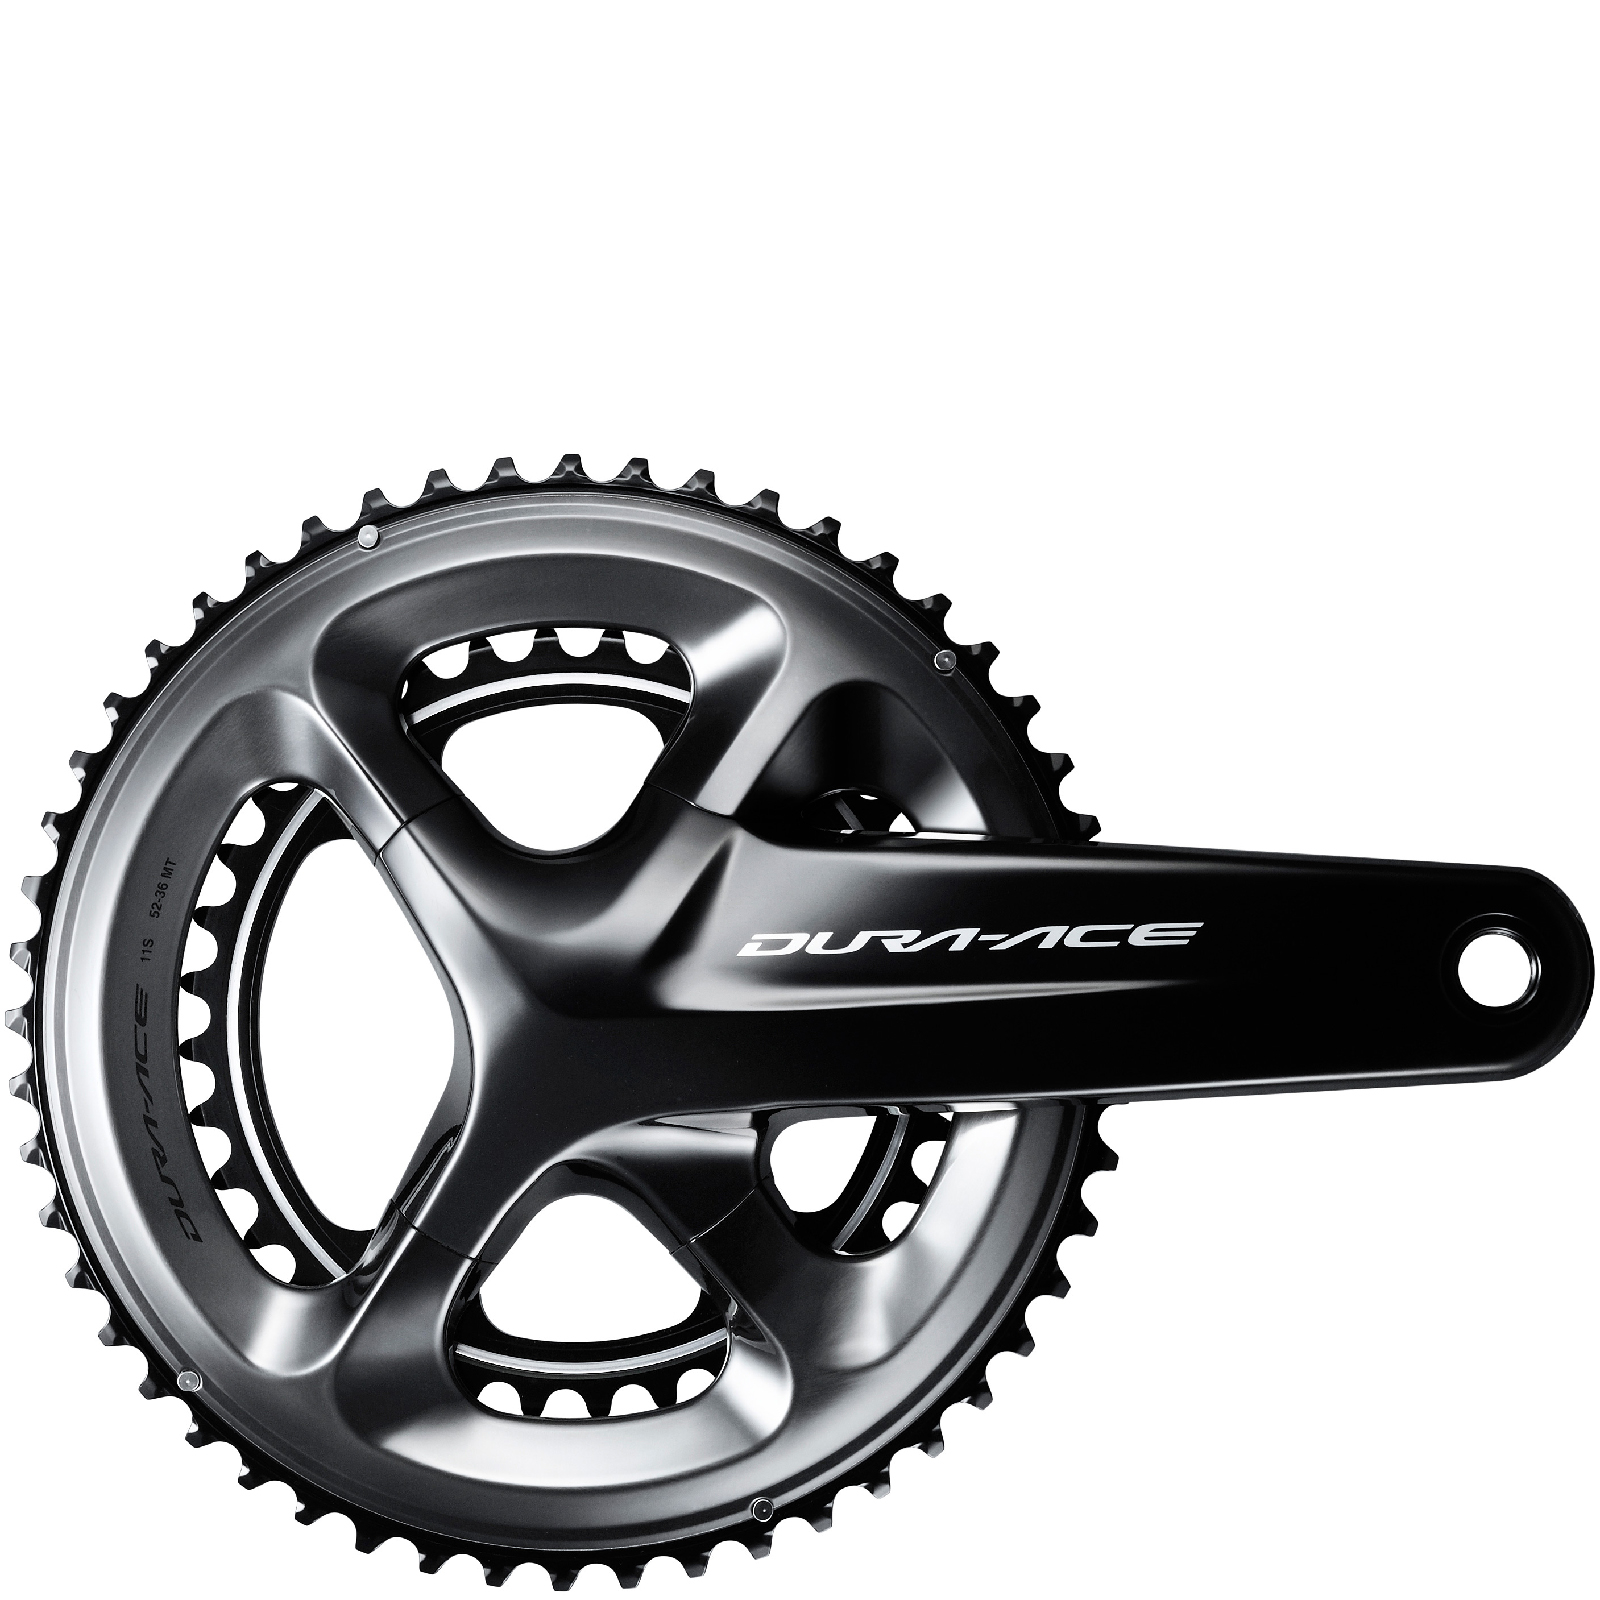 Shimano Dura Ace R9100 Chainset - 175mm - 53/39